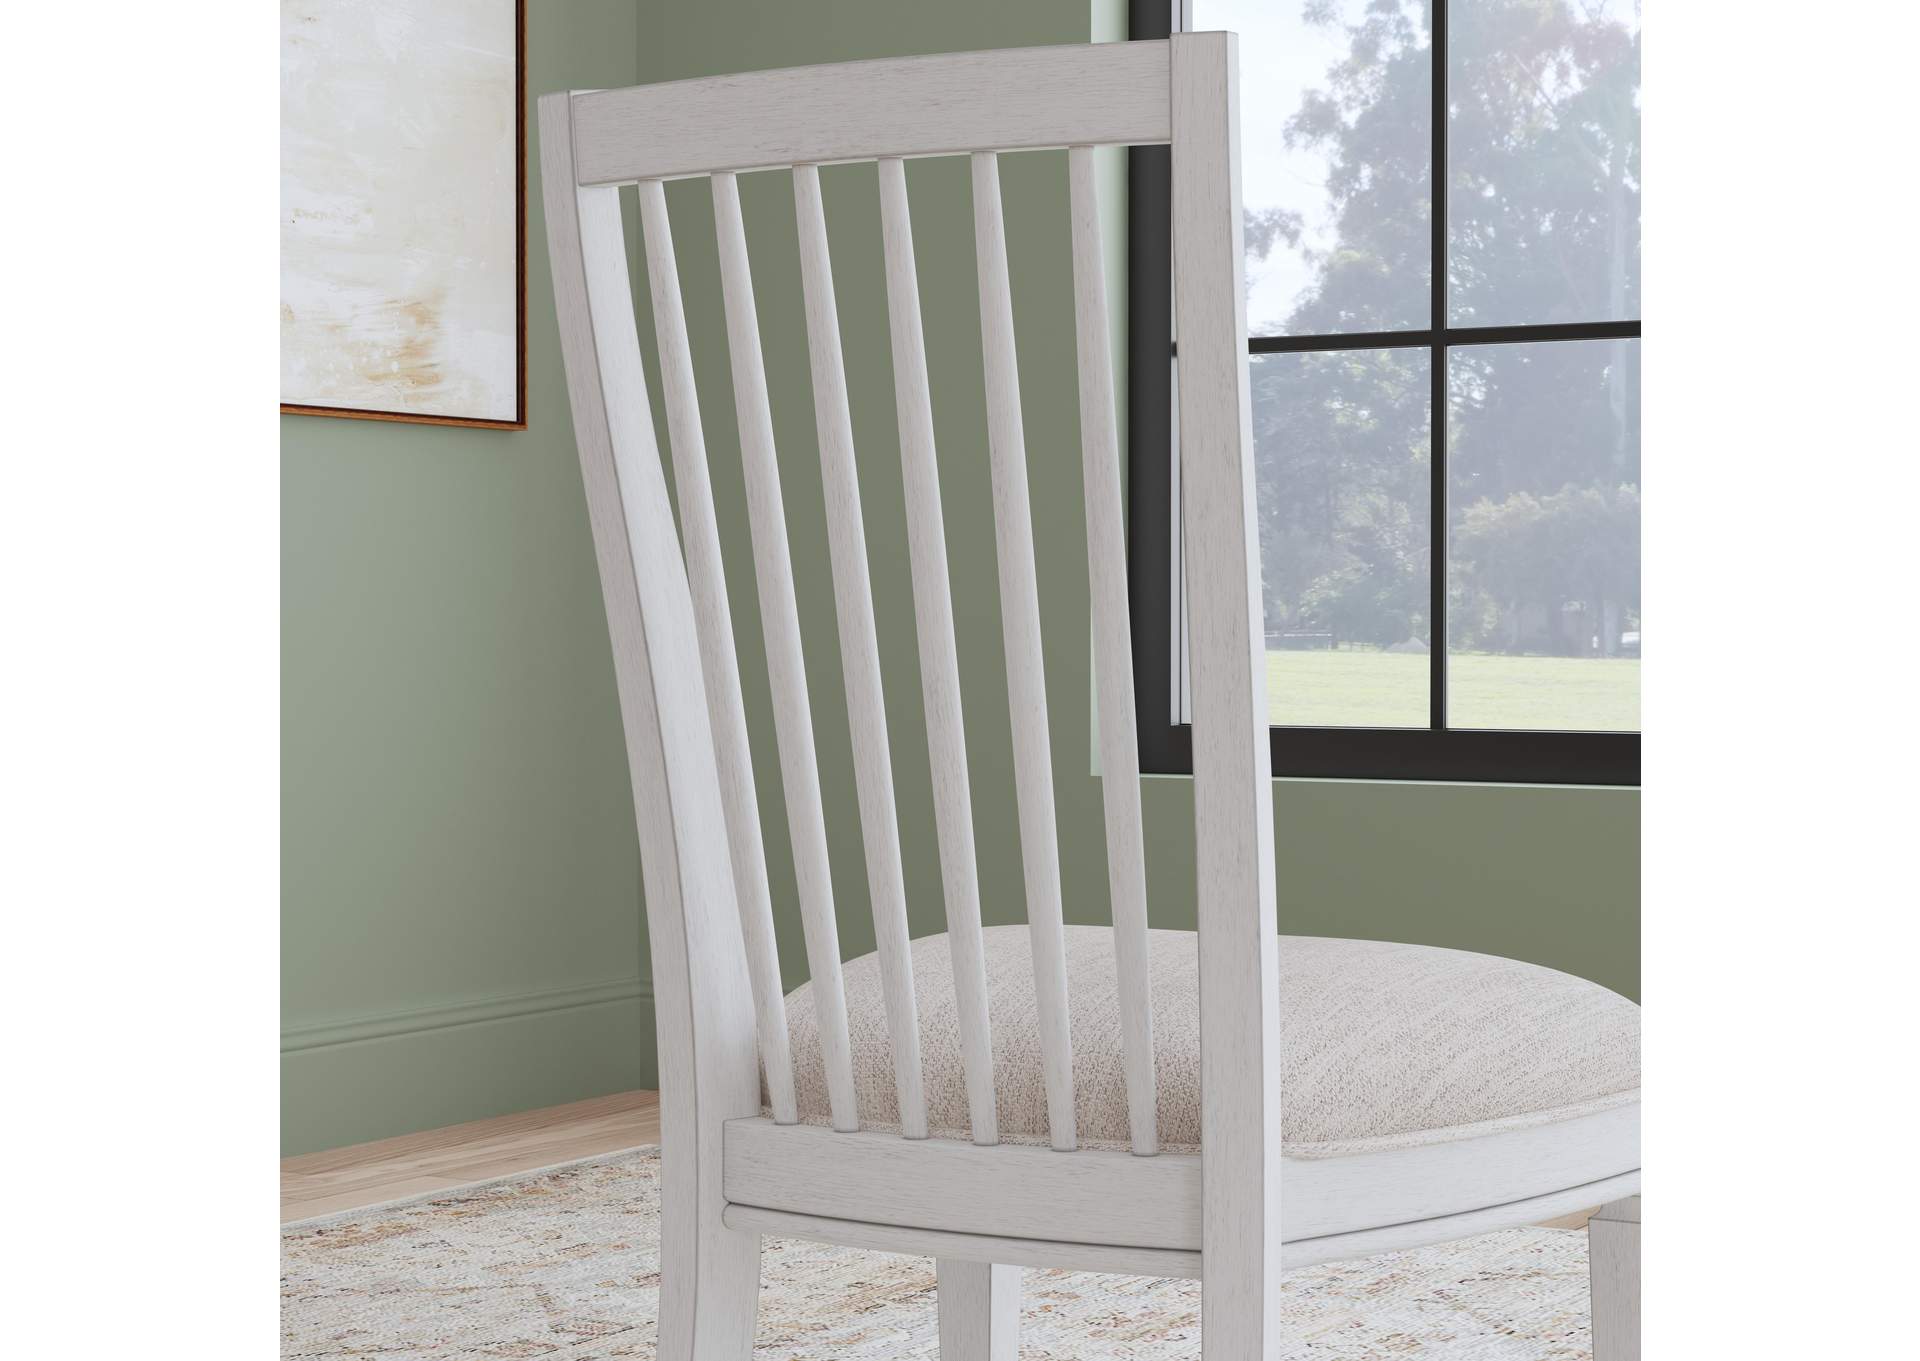 Melody Upholstered Dining Chair,Flexsteel